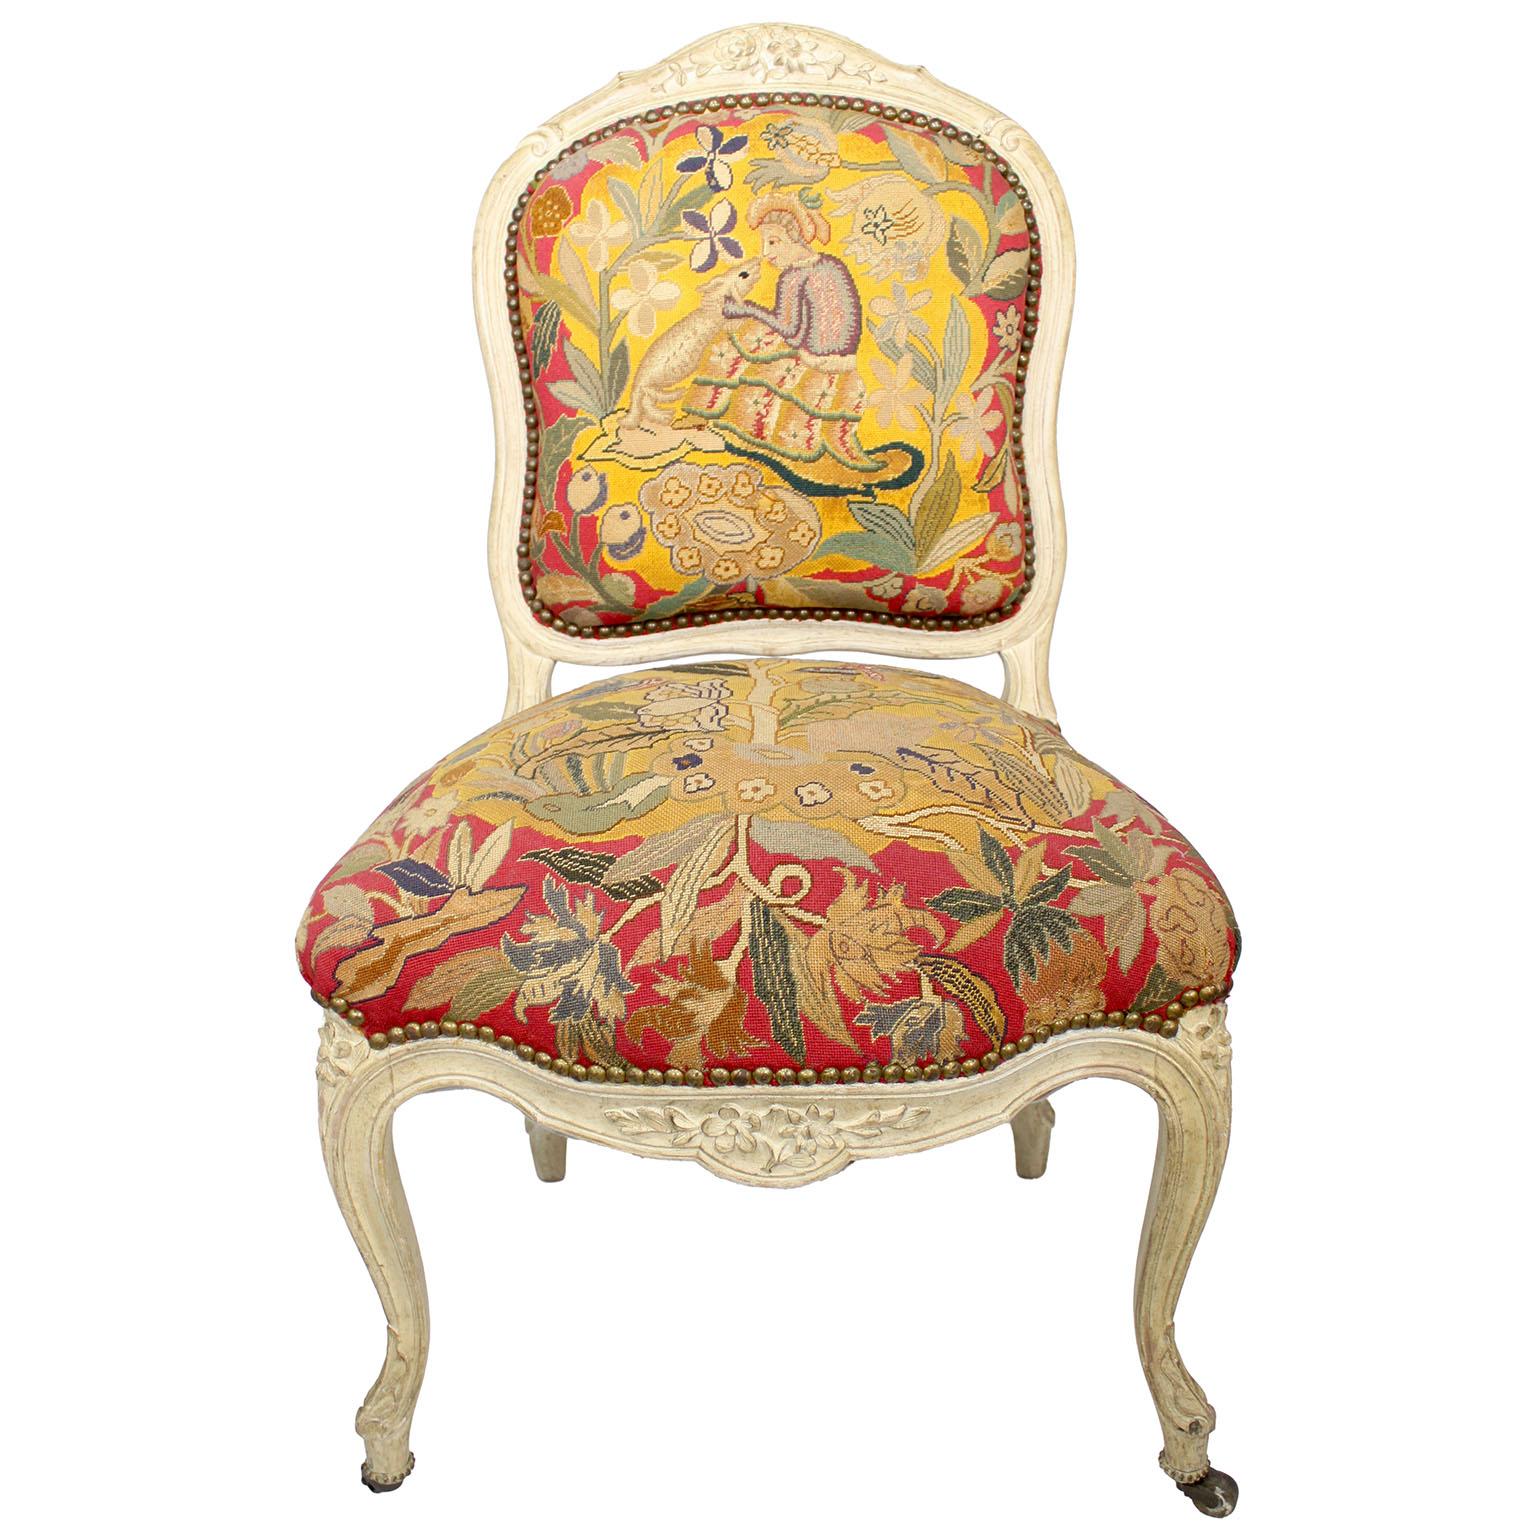 A Pair of French 19th Century Louis XV Style White-Lacquer-Finished and Needlepoint Tapestry Side Chairs, the front legs with coasters. Circa: Paris, 1890-1900.

Height: 36 1/2 inches (92.7 cm)
Width: 22 inches (55.9 cm)
Depth: 22 7/8 inches (58.1